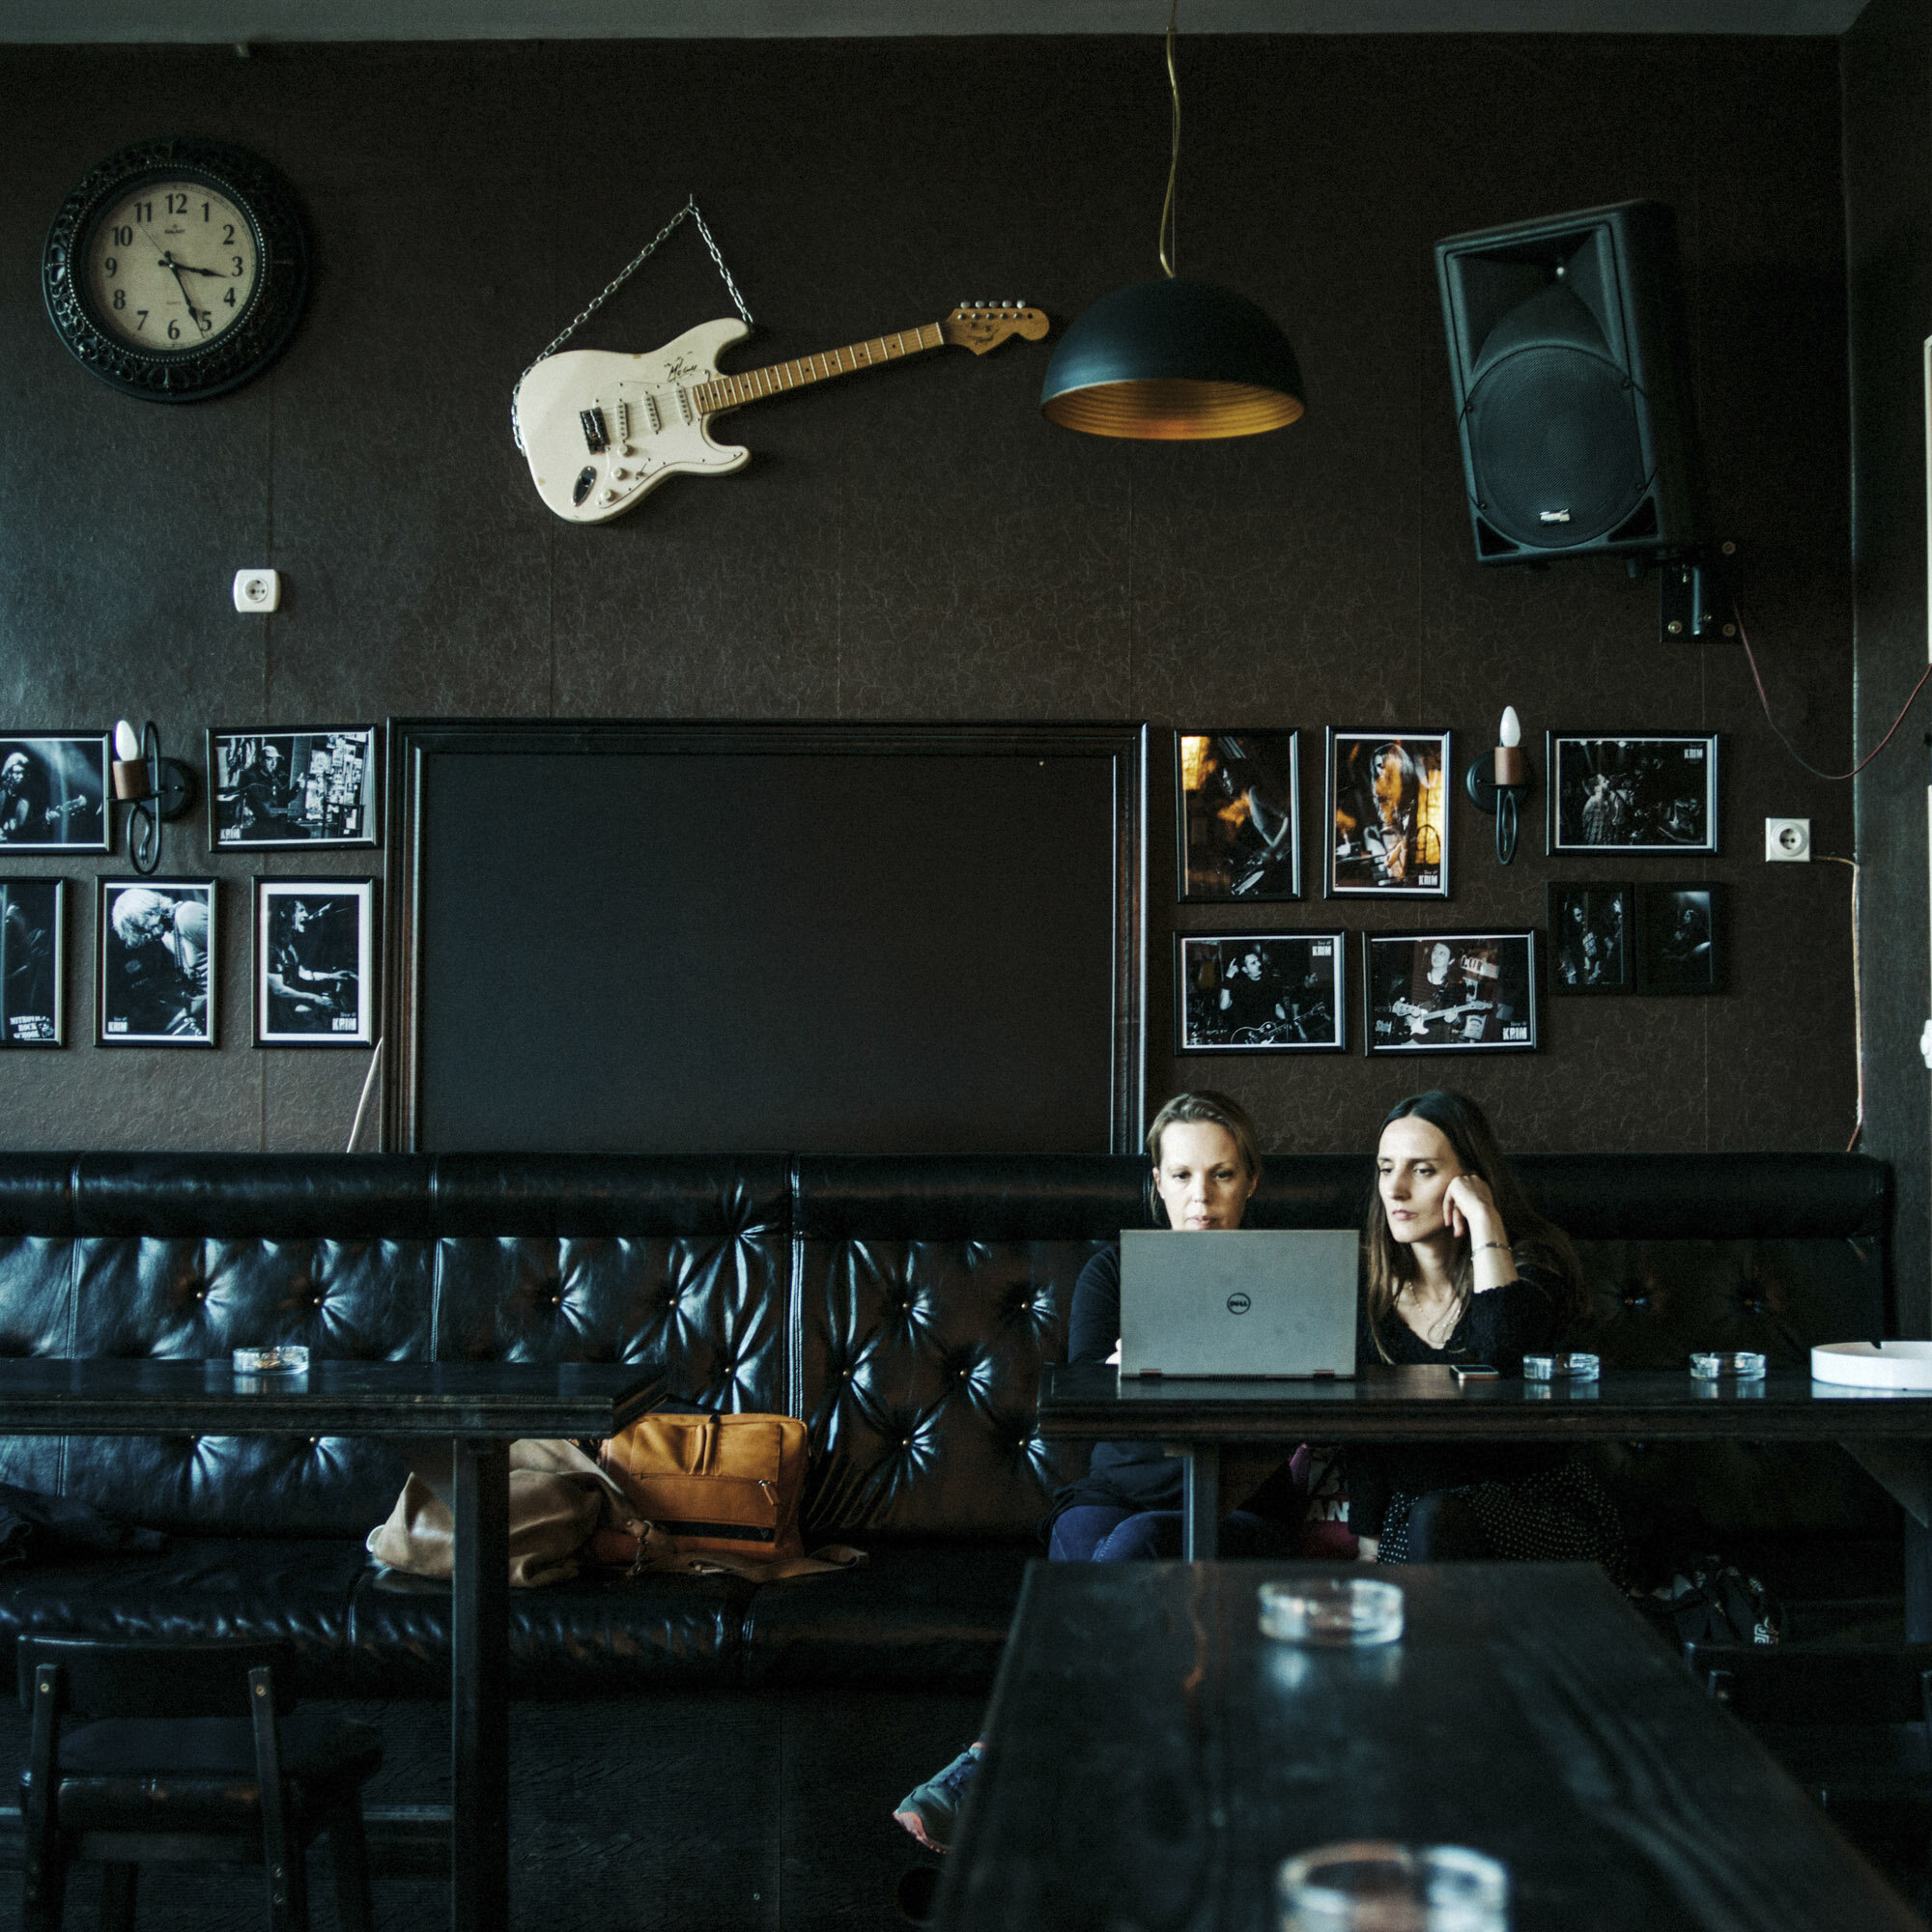  Wendy Hassler-Forest (on the left), rock school director, in the facilities of the northern branch of the rock school. On the wall, a guitar and pictures of rock musicians who came by in Mitrovica to play. Mitrovica, Kosovo, March 24, 2017. 